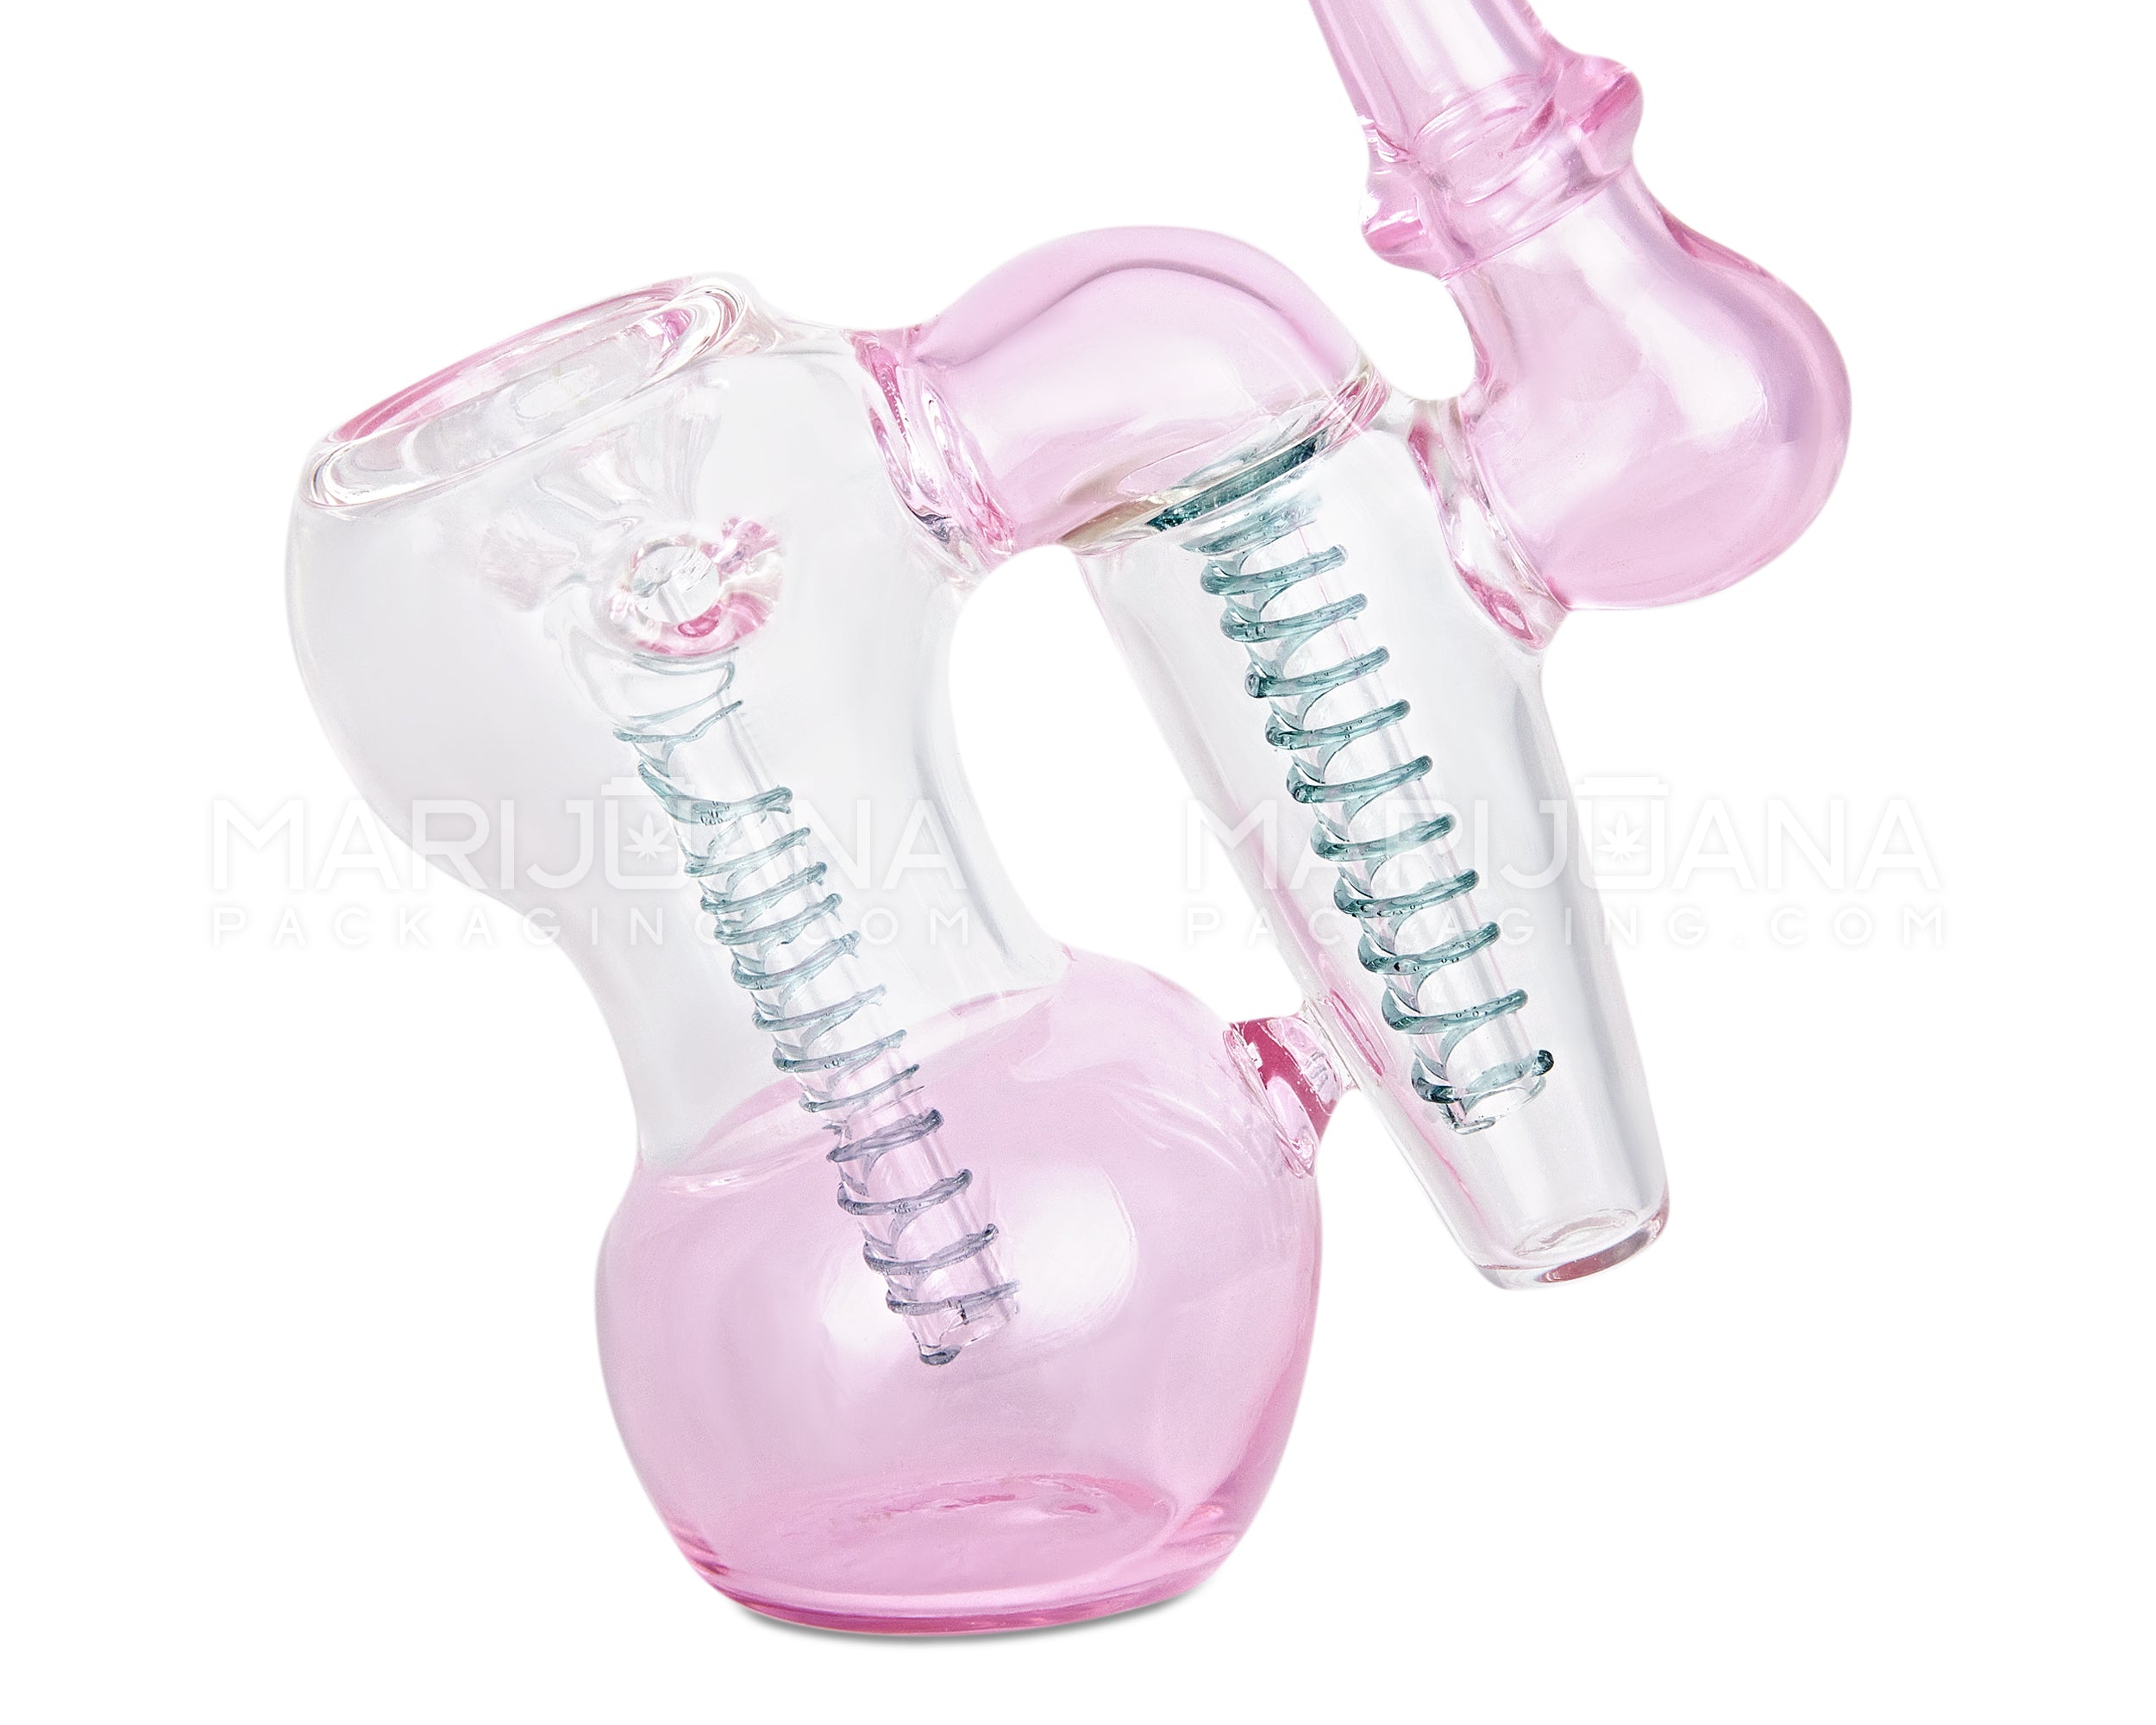 Ringed Double Chamber Bubbler w/ Multi Knockers | 7.5in Tall - Glass - Pink - 8